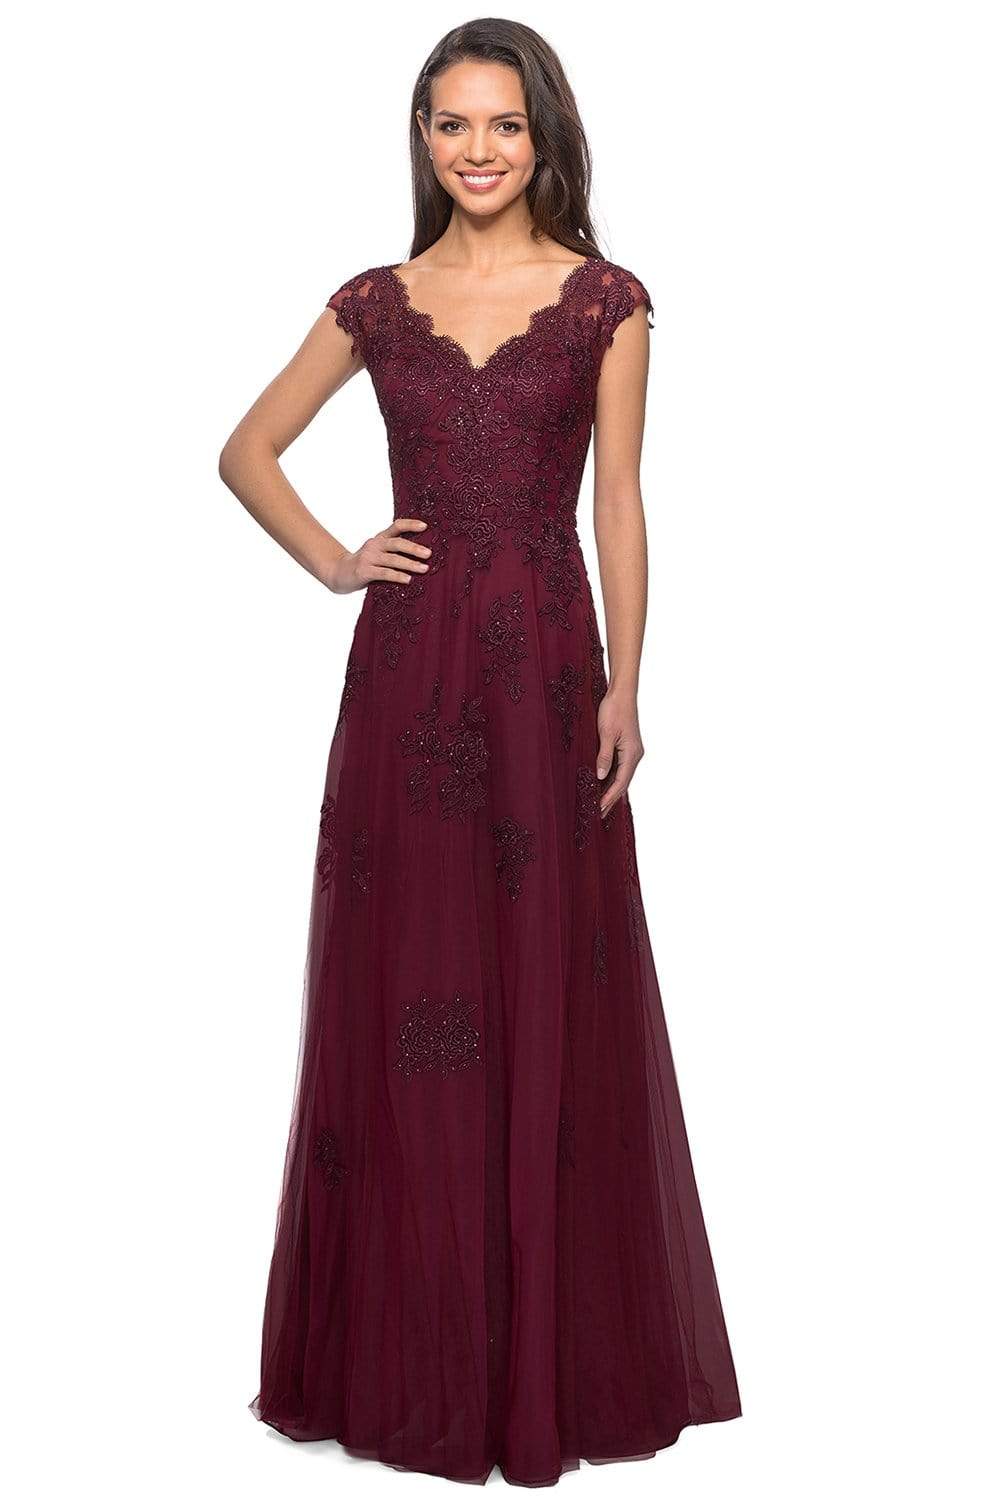 Image of La Femme - 26942 V-Neck Floral Lace Mother of the Groom Tulle Gown